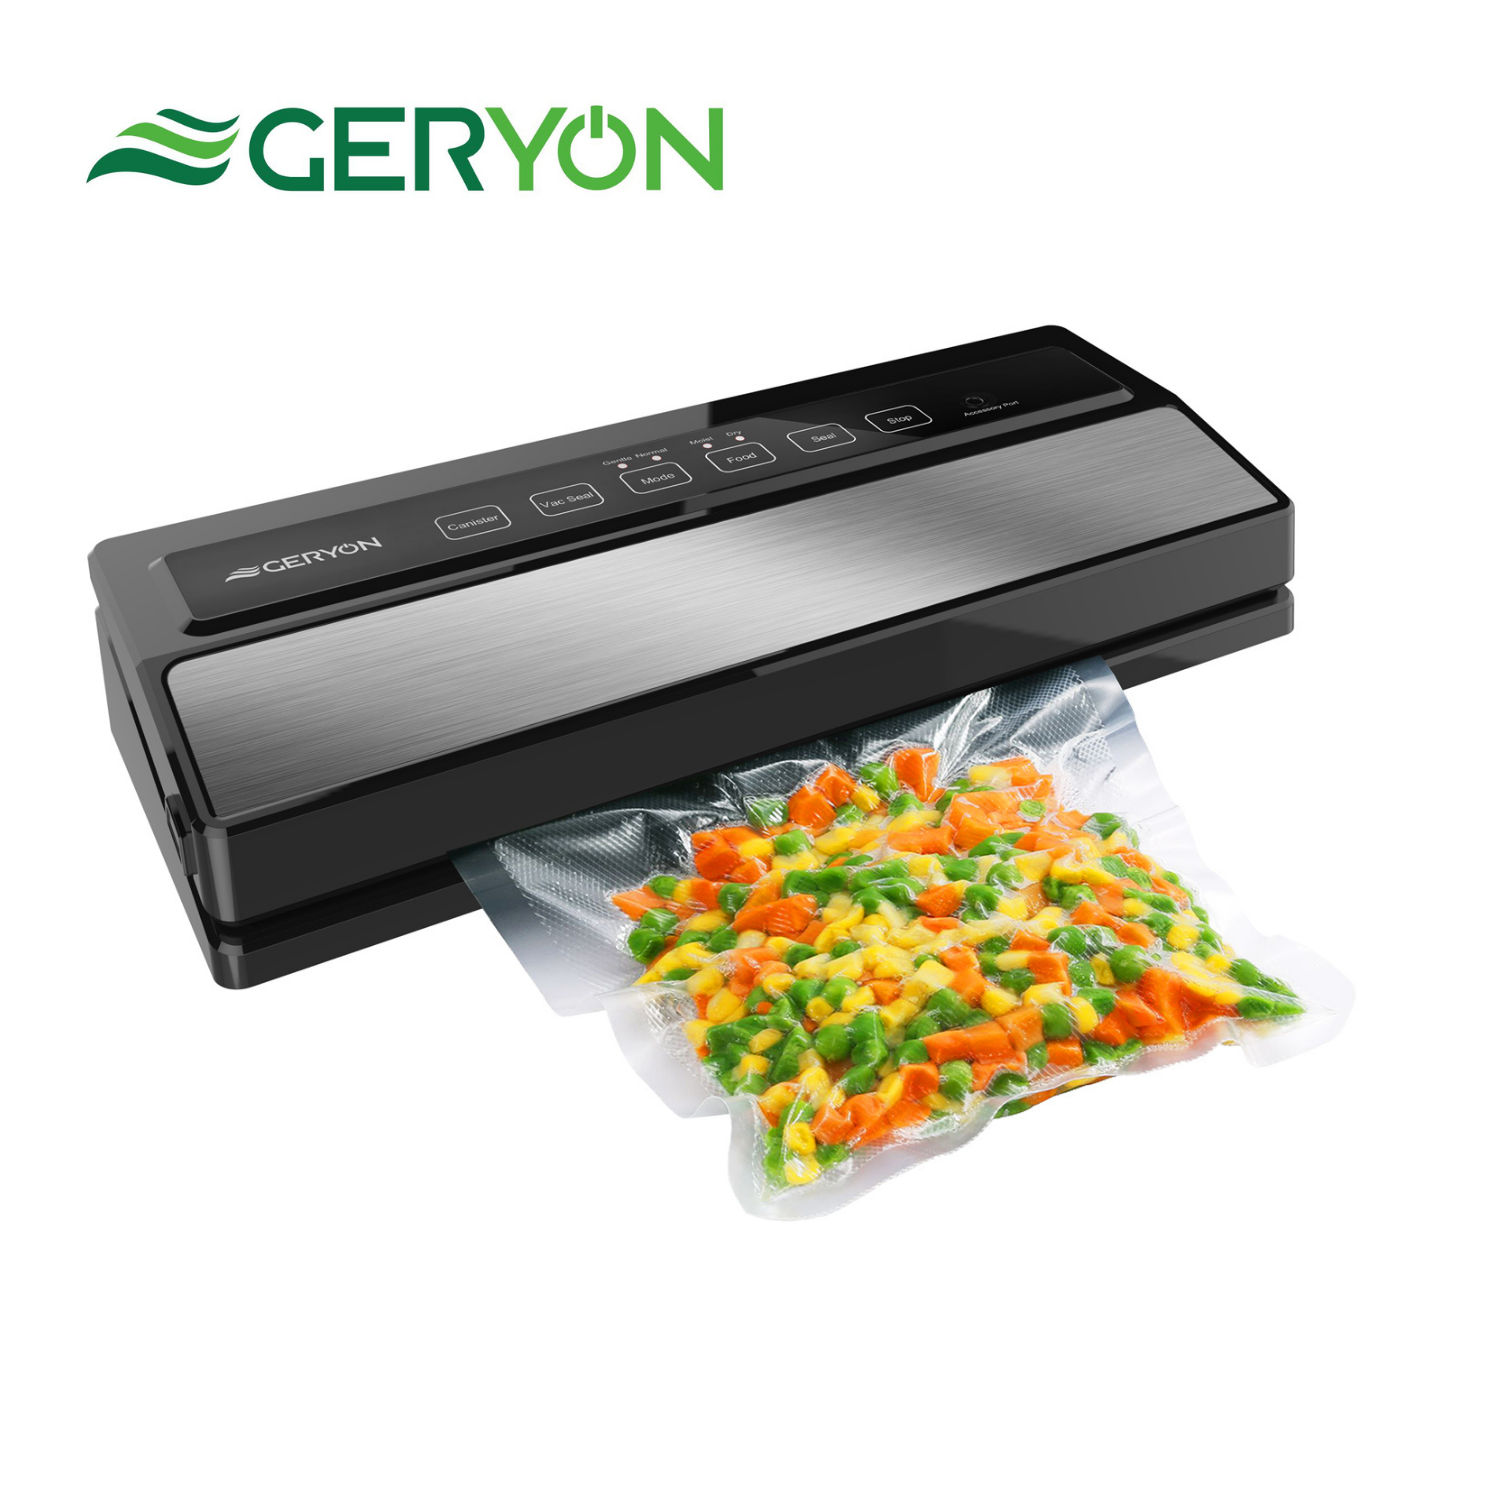 

GERYON Best Vacuum Sealer Machine 220V/110V Automatic Dry and Moist Food Modes Degasser Vacuum Packer with 5pcs Packing Bags